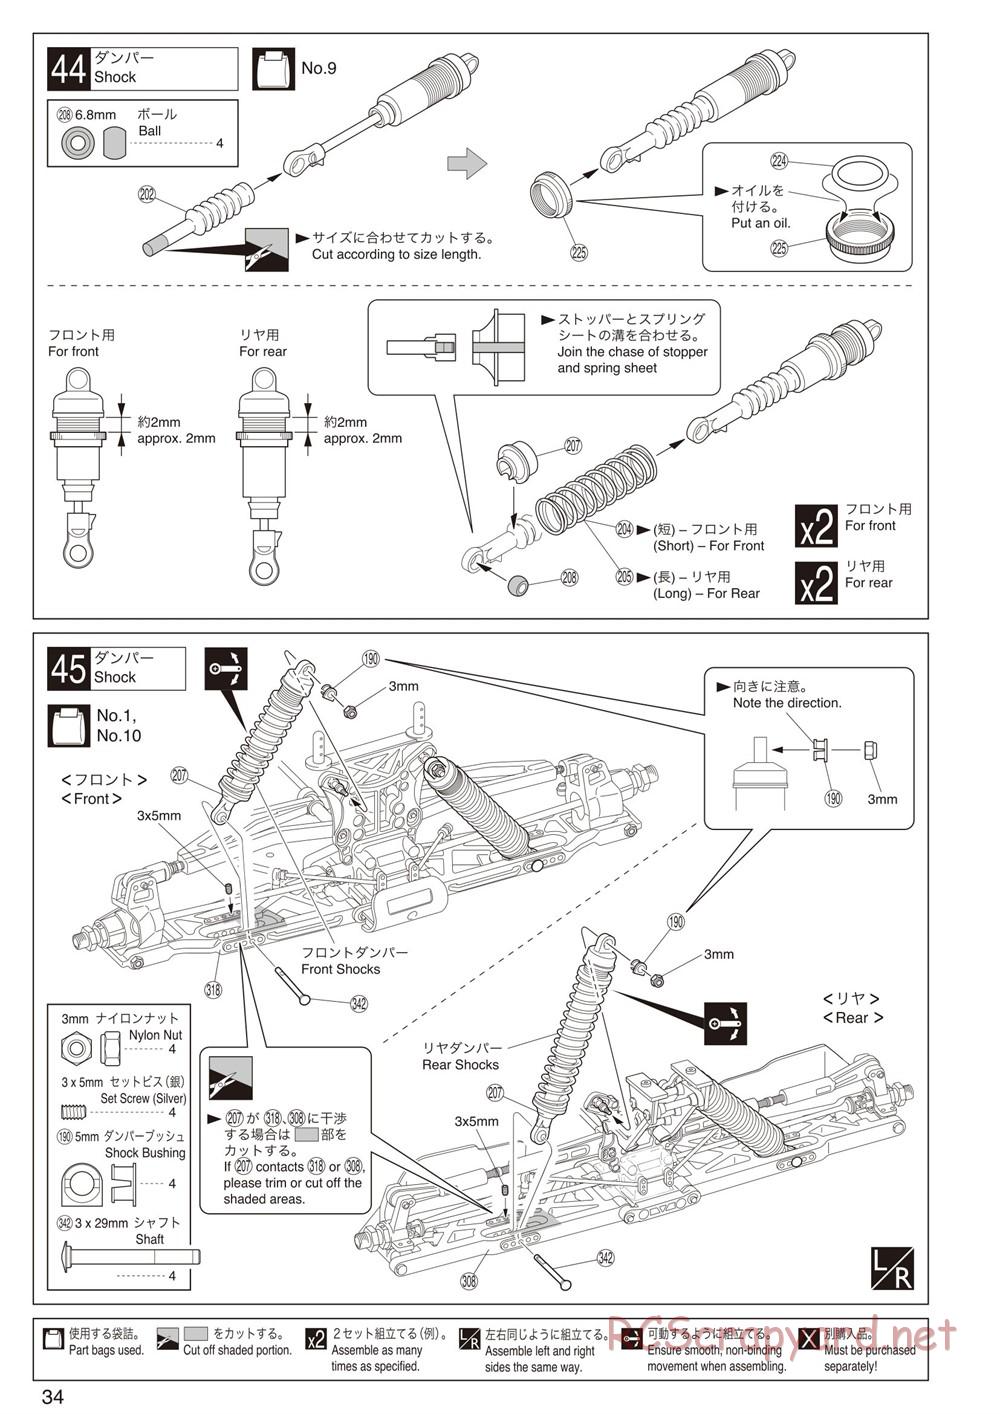 Kyosho - Inferno ST-RR Evo.2 - Manual - Page 38